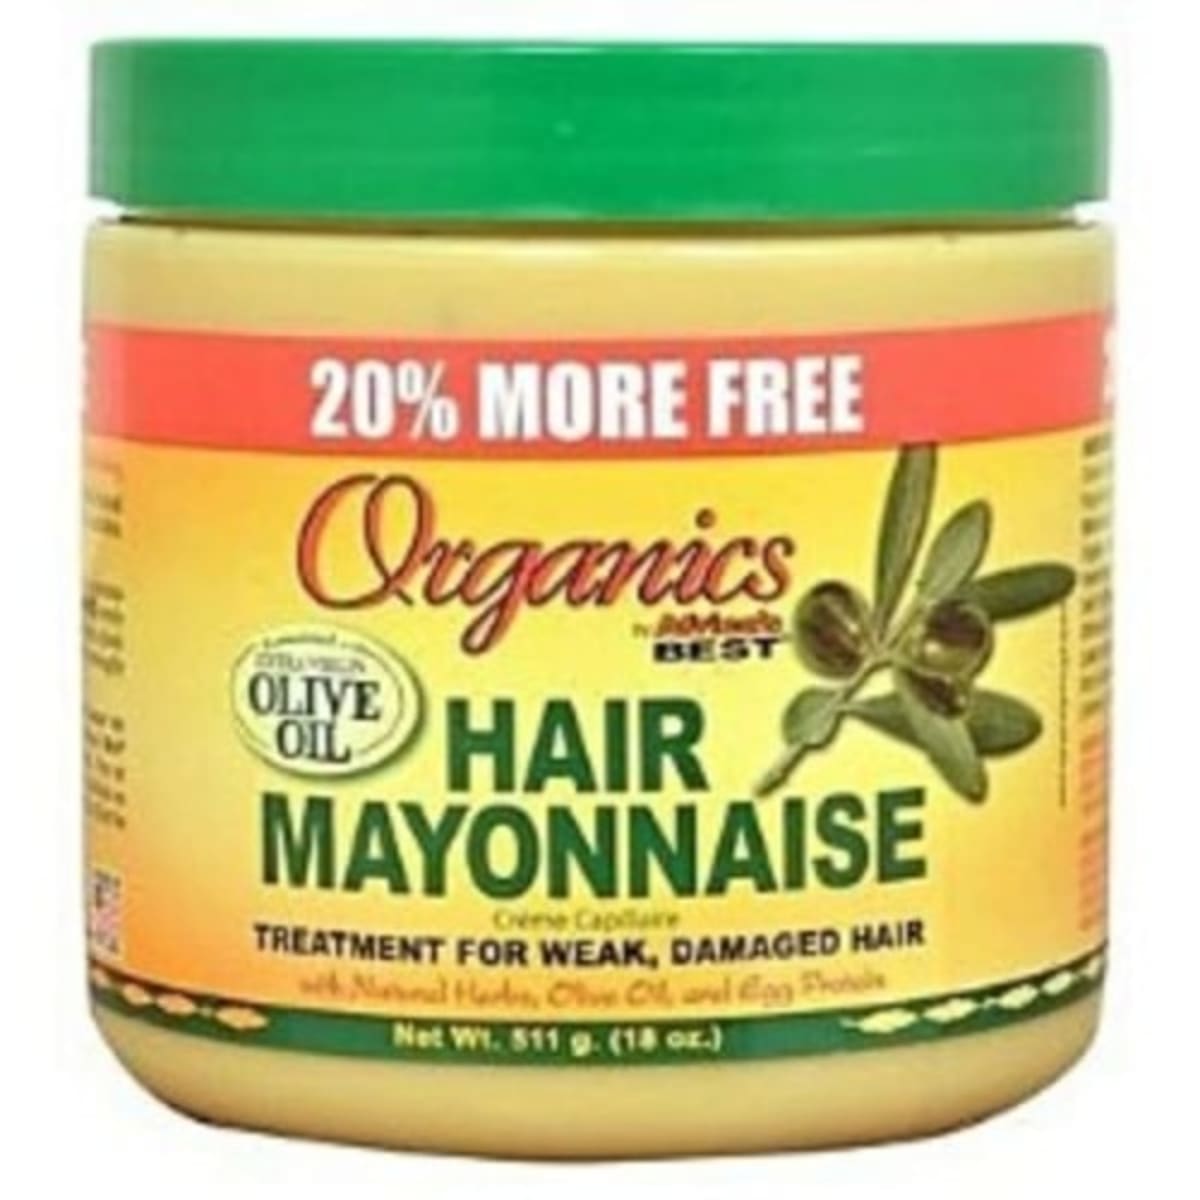 African Best hair mayonnaise enriched with olive oil - Avana